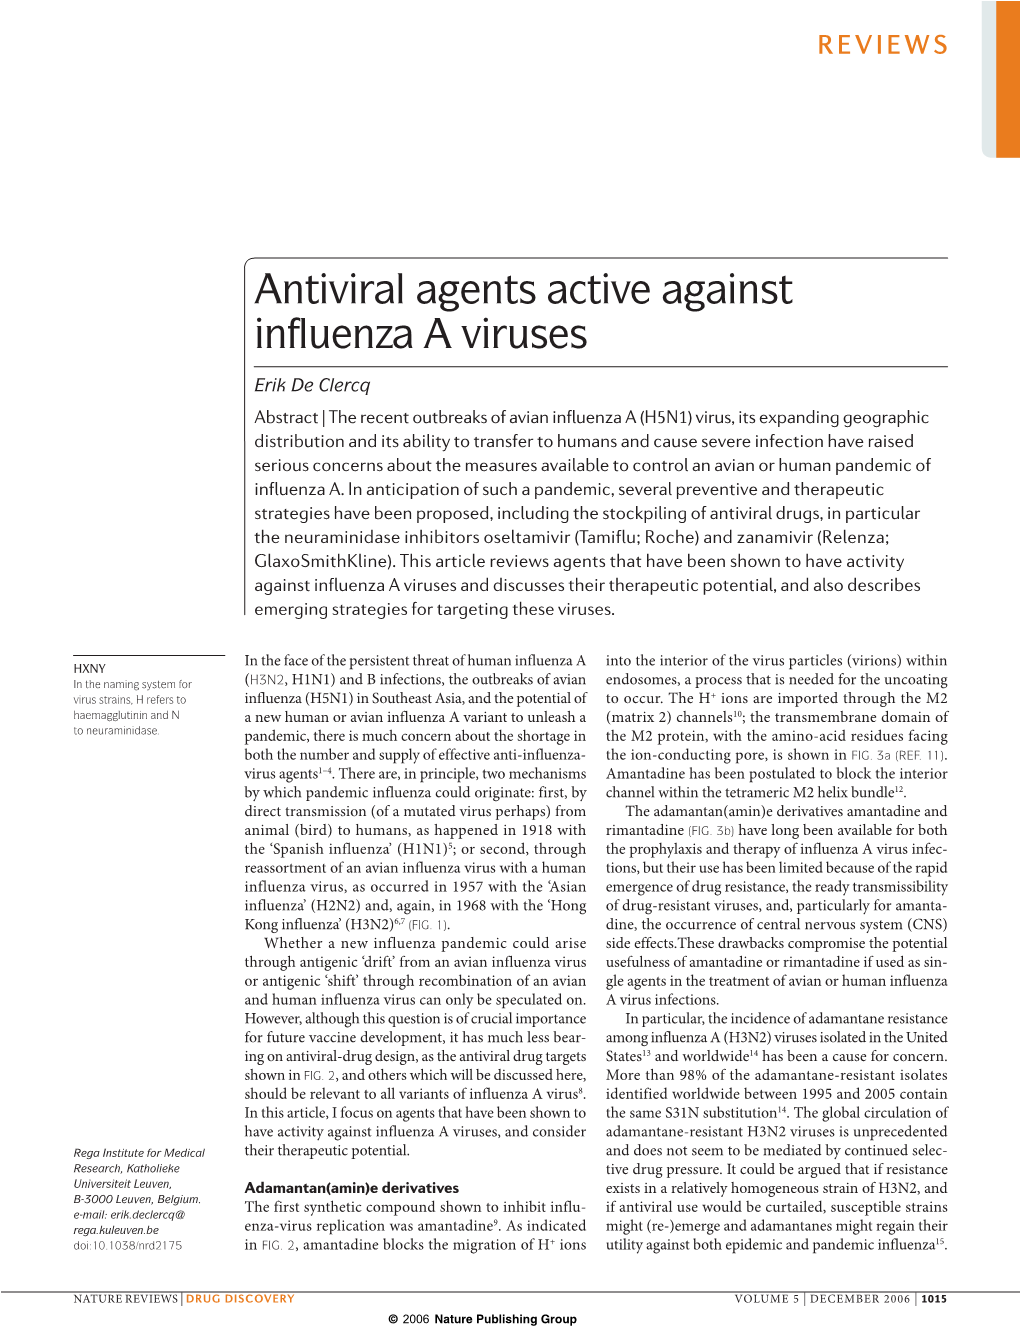 Antiviral Agents Active Against Influenza a Viruses